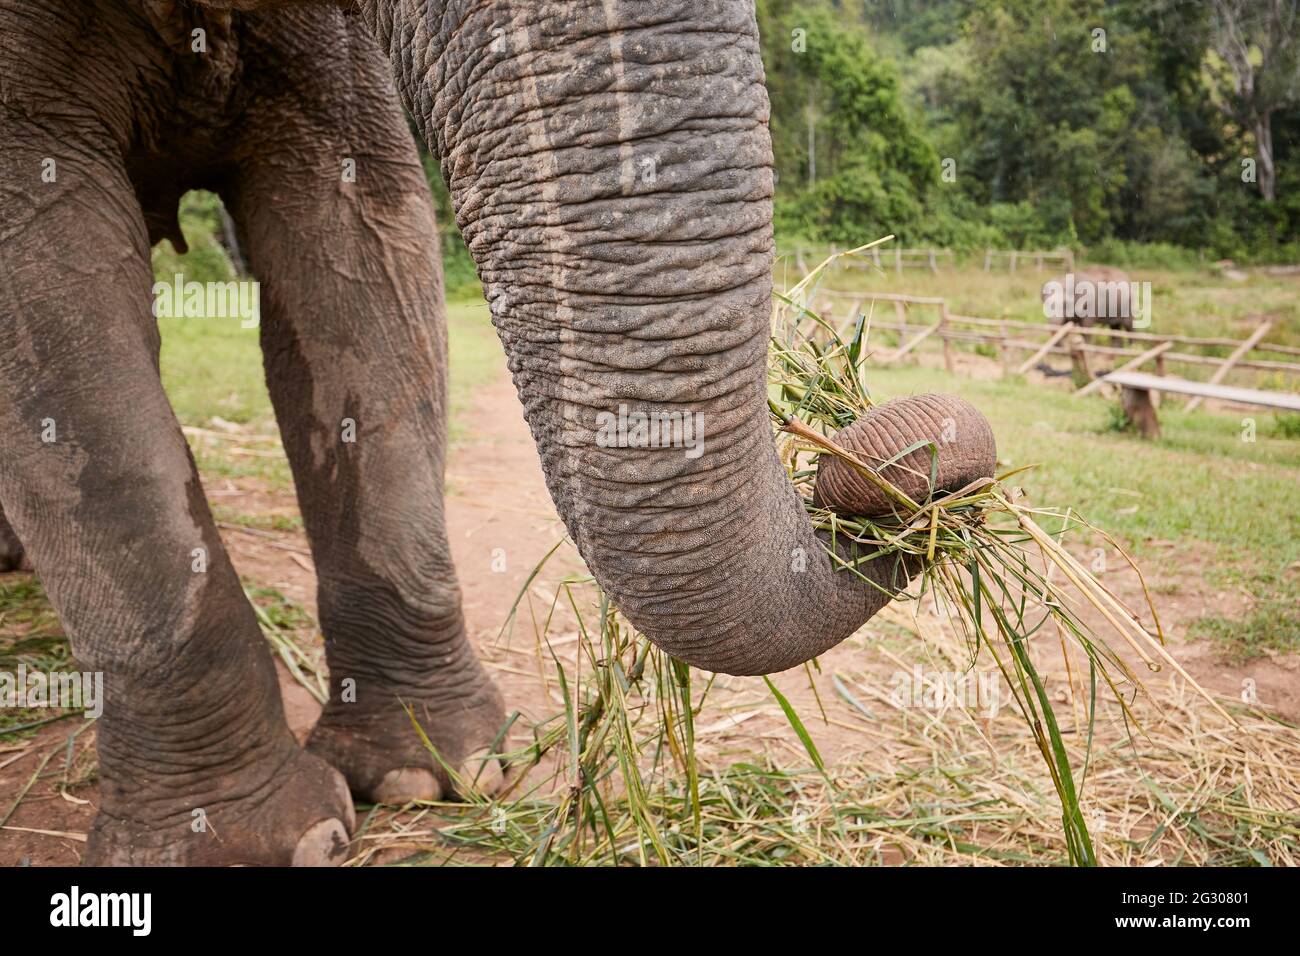 Close-up view of elephant trunk during eating, Chiang Mai Province, Thailand Stock Photo